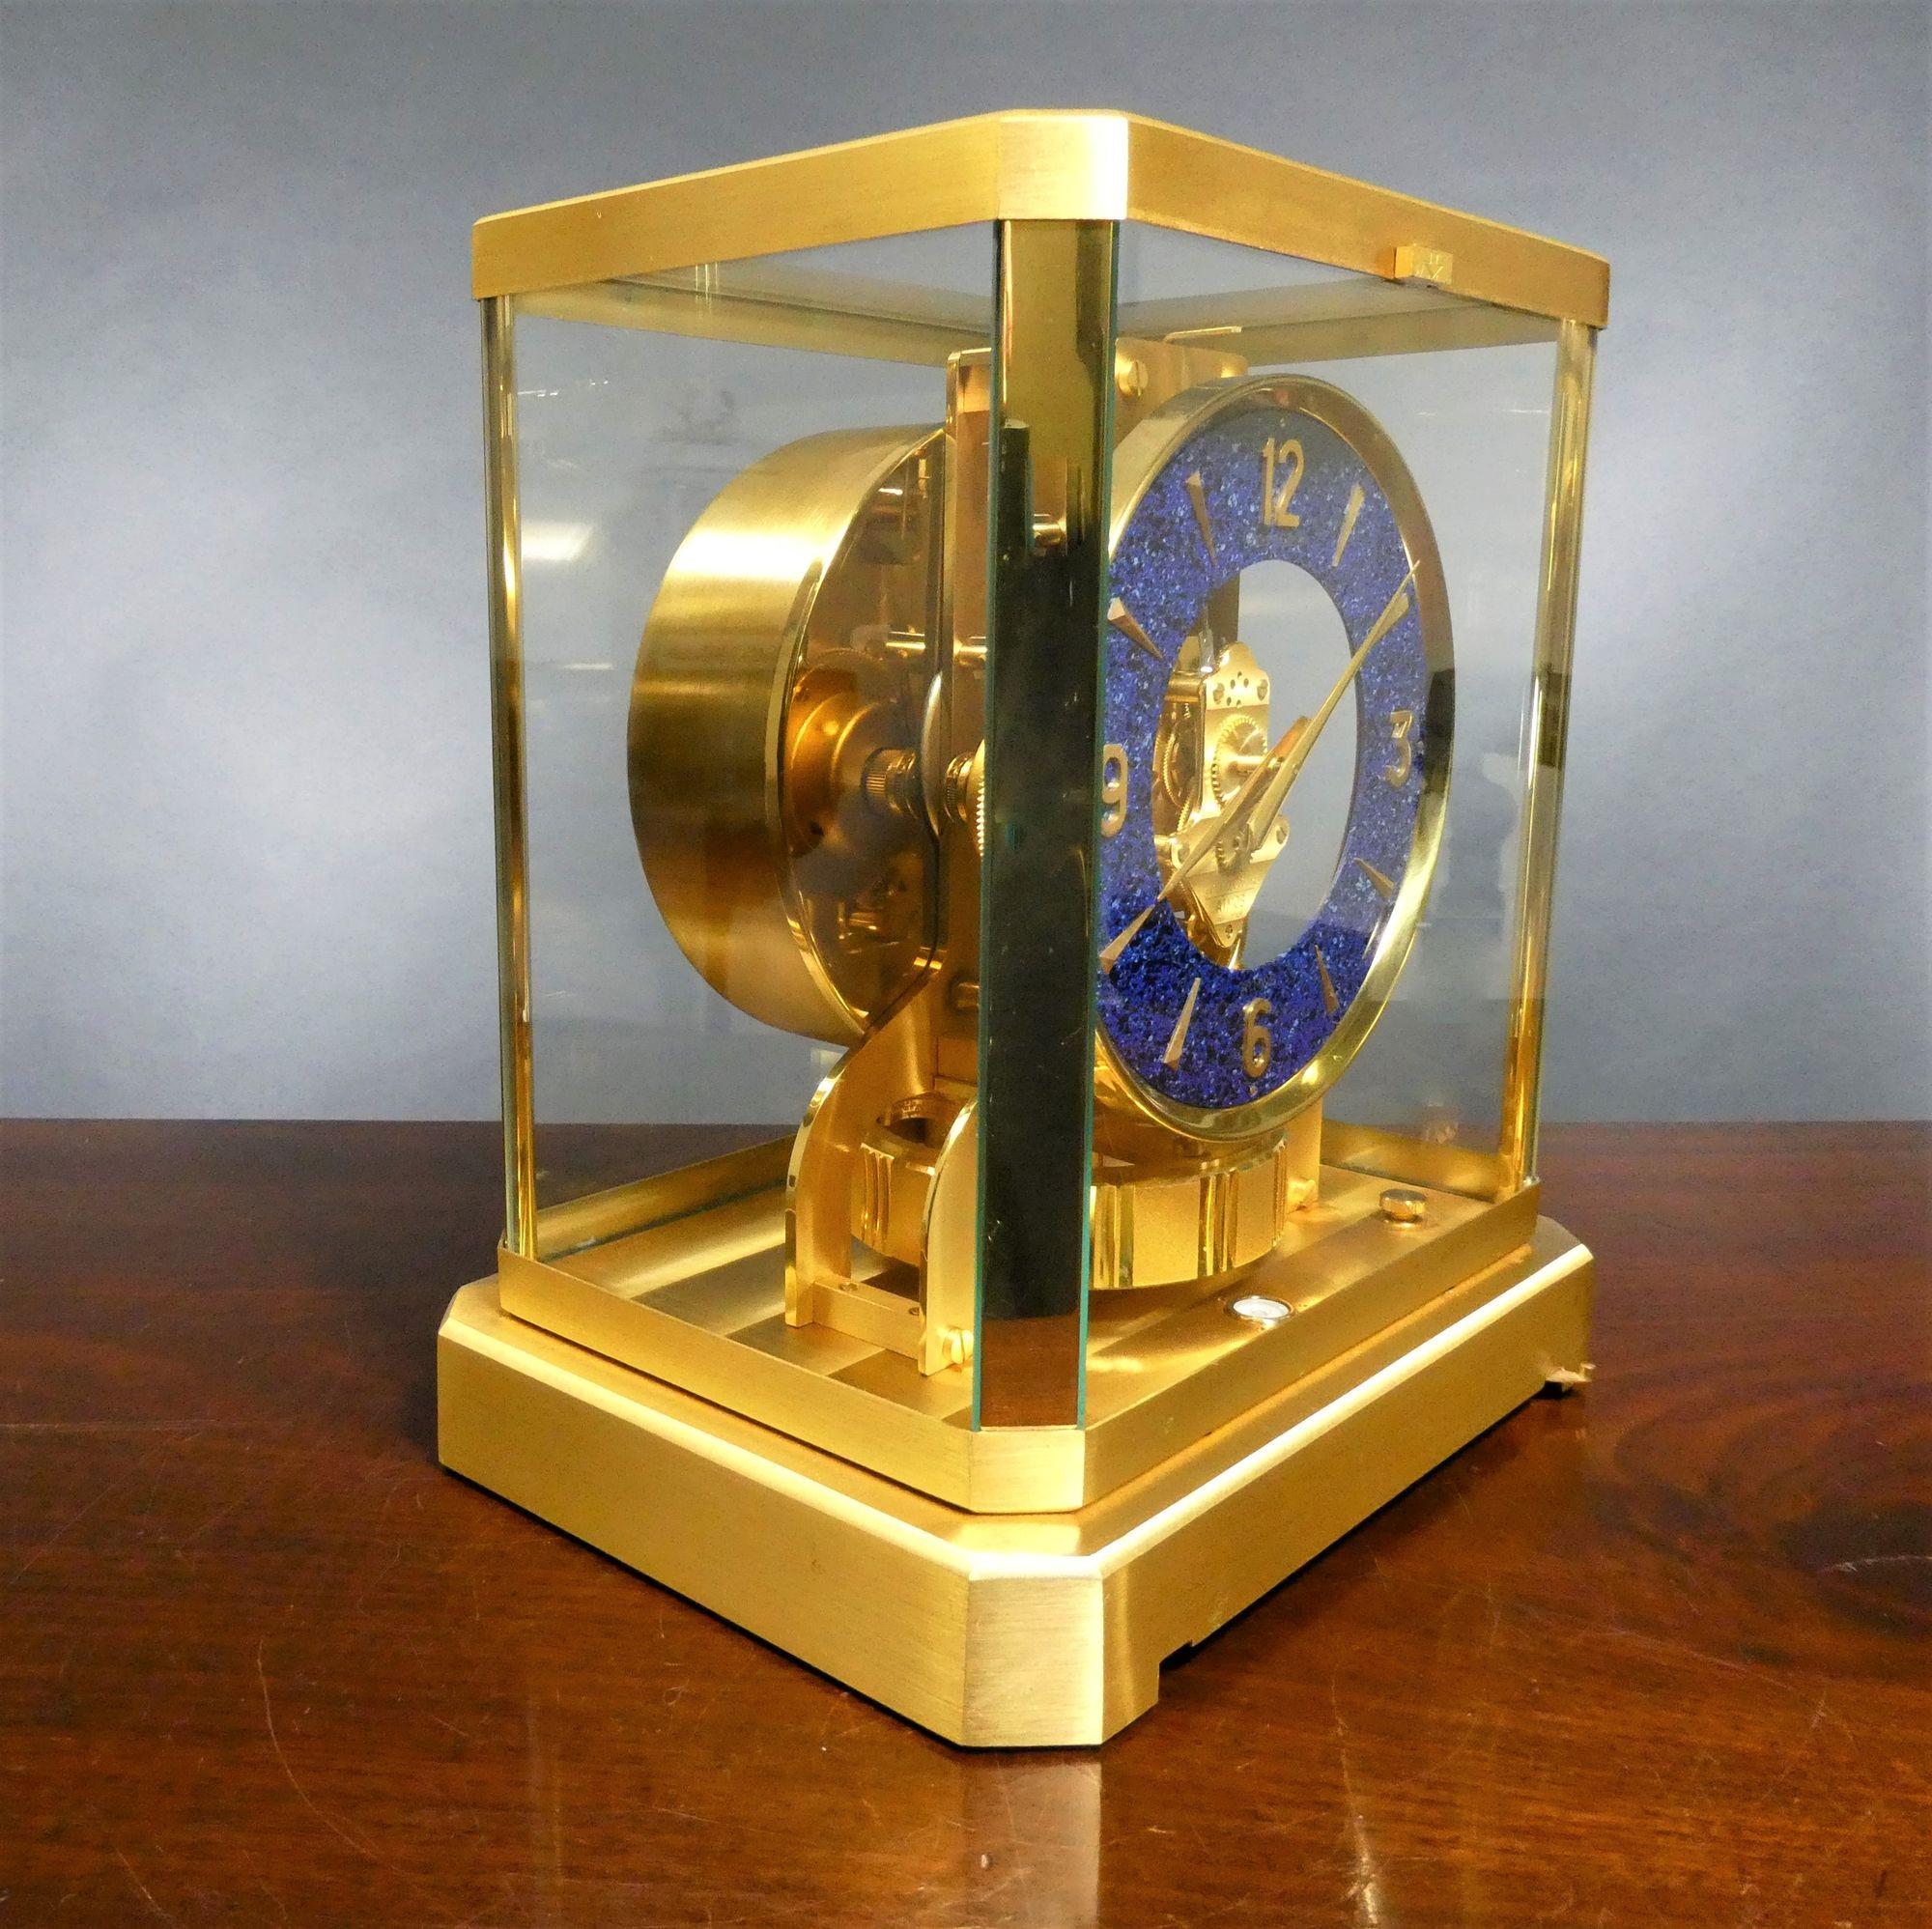 Swiss Jaeger-le-coultre Atmos Clock with Lapis Lazuli Dial For Sale